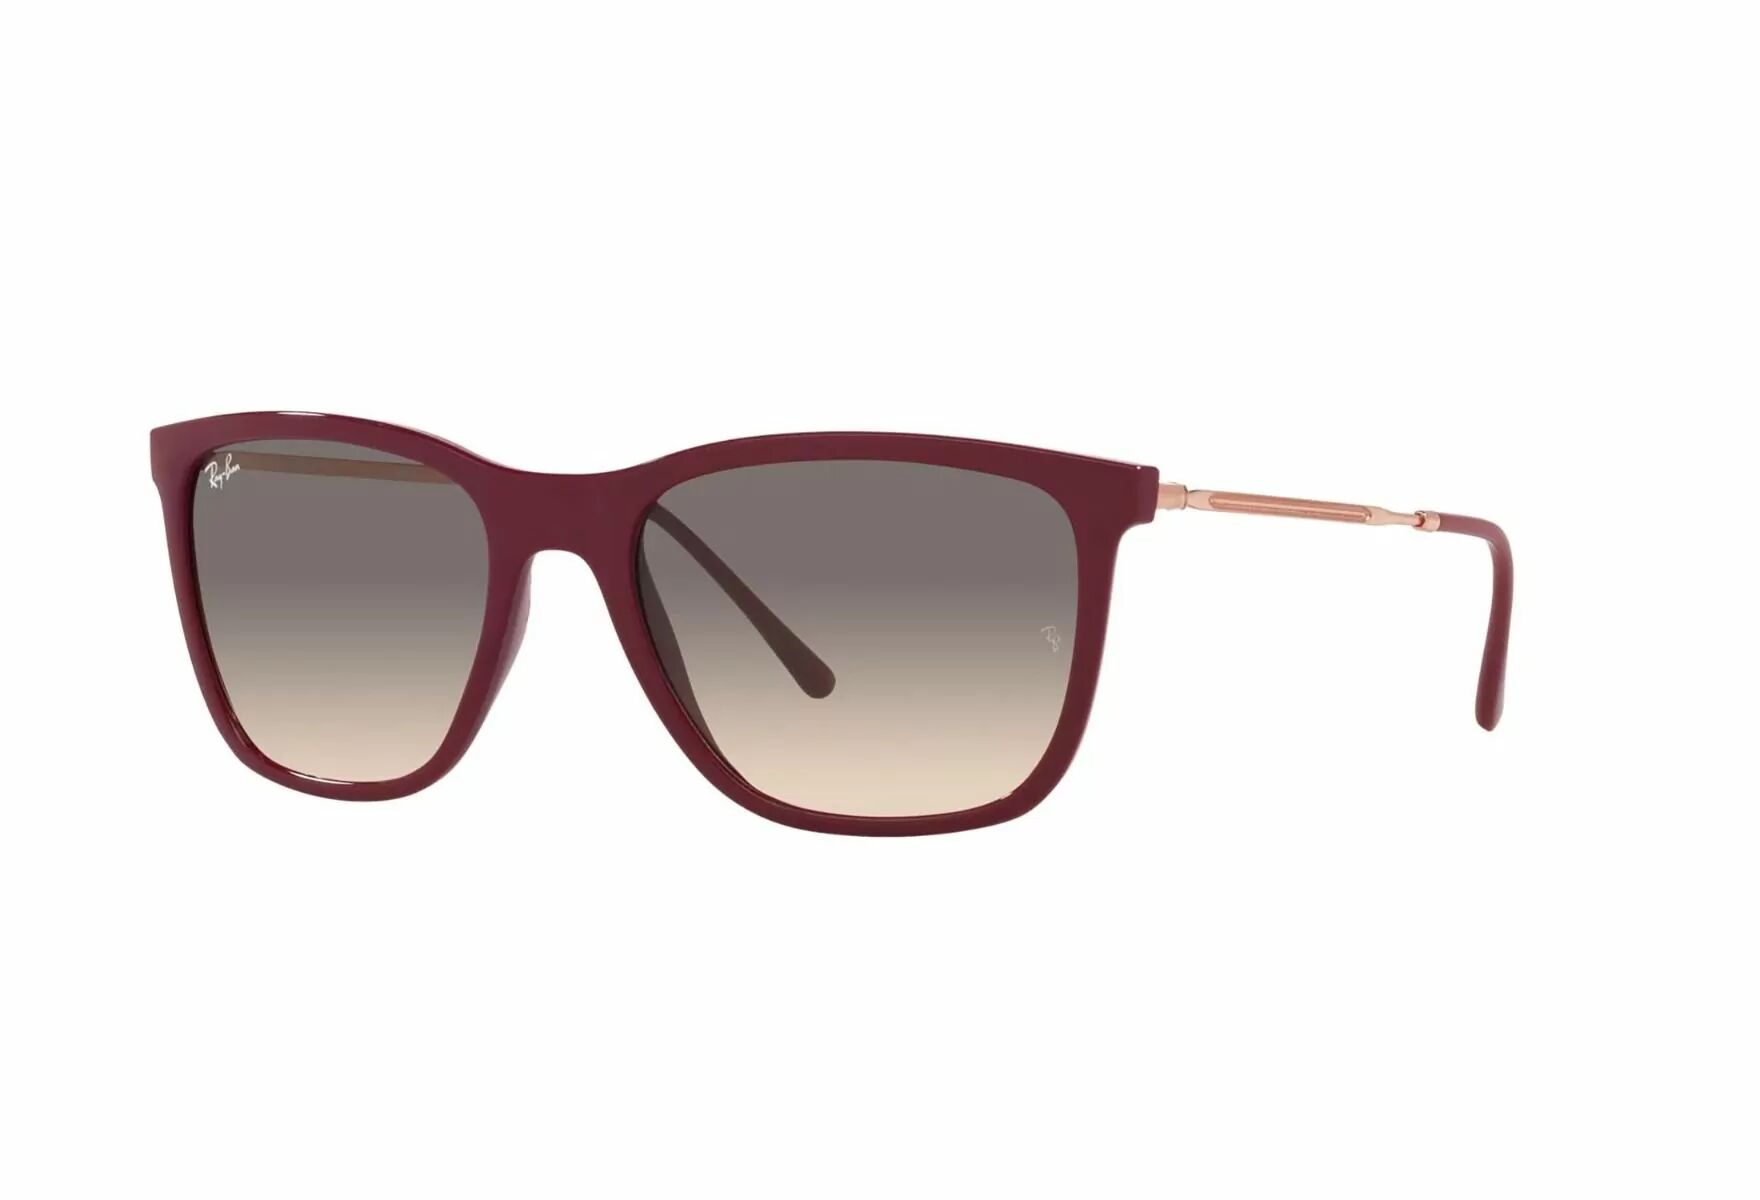 Ray-Ban Rb4344 653432 0rb4344 - Red Cherry, Clear Gradient Grey, Herre, Dame